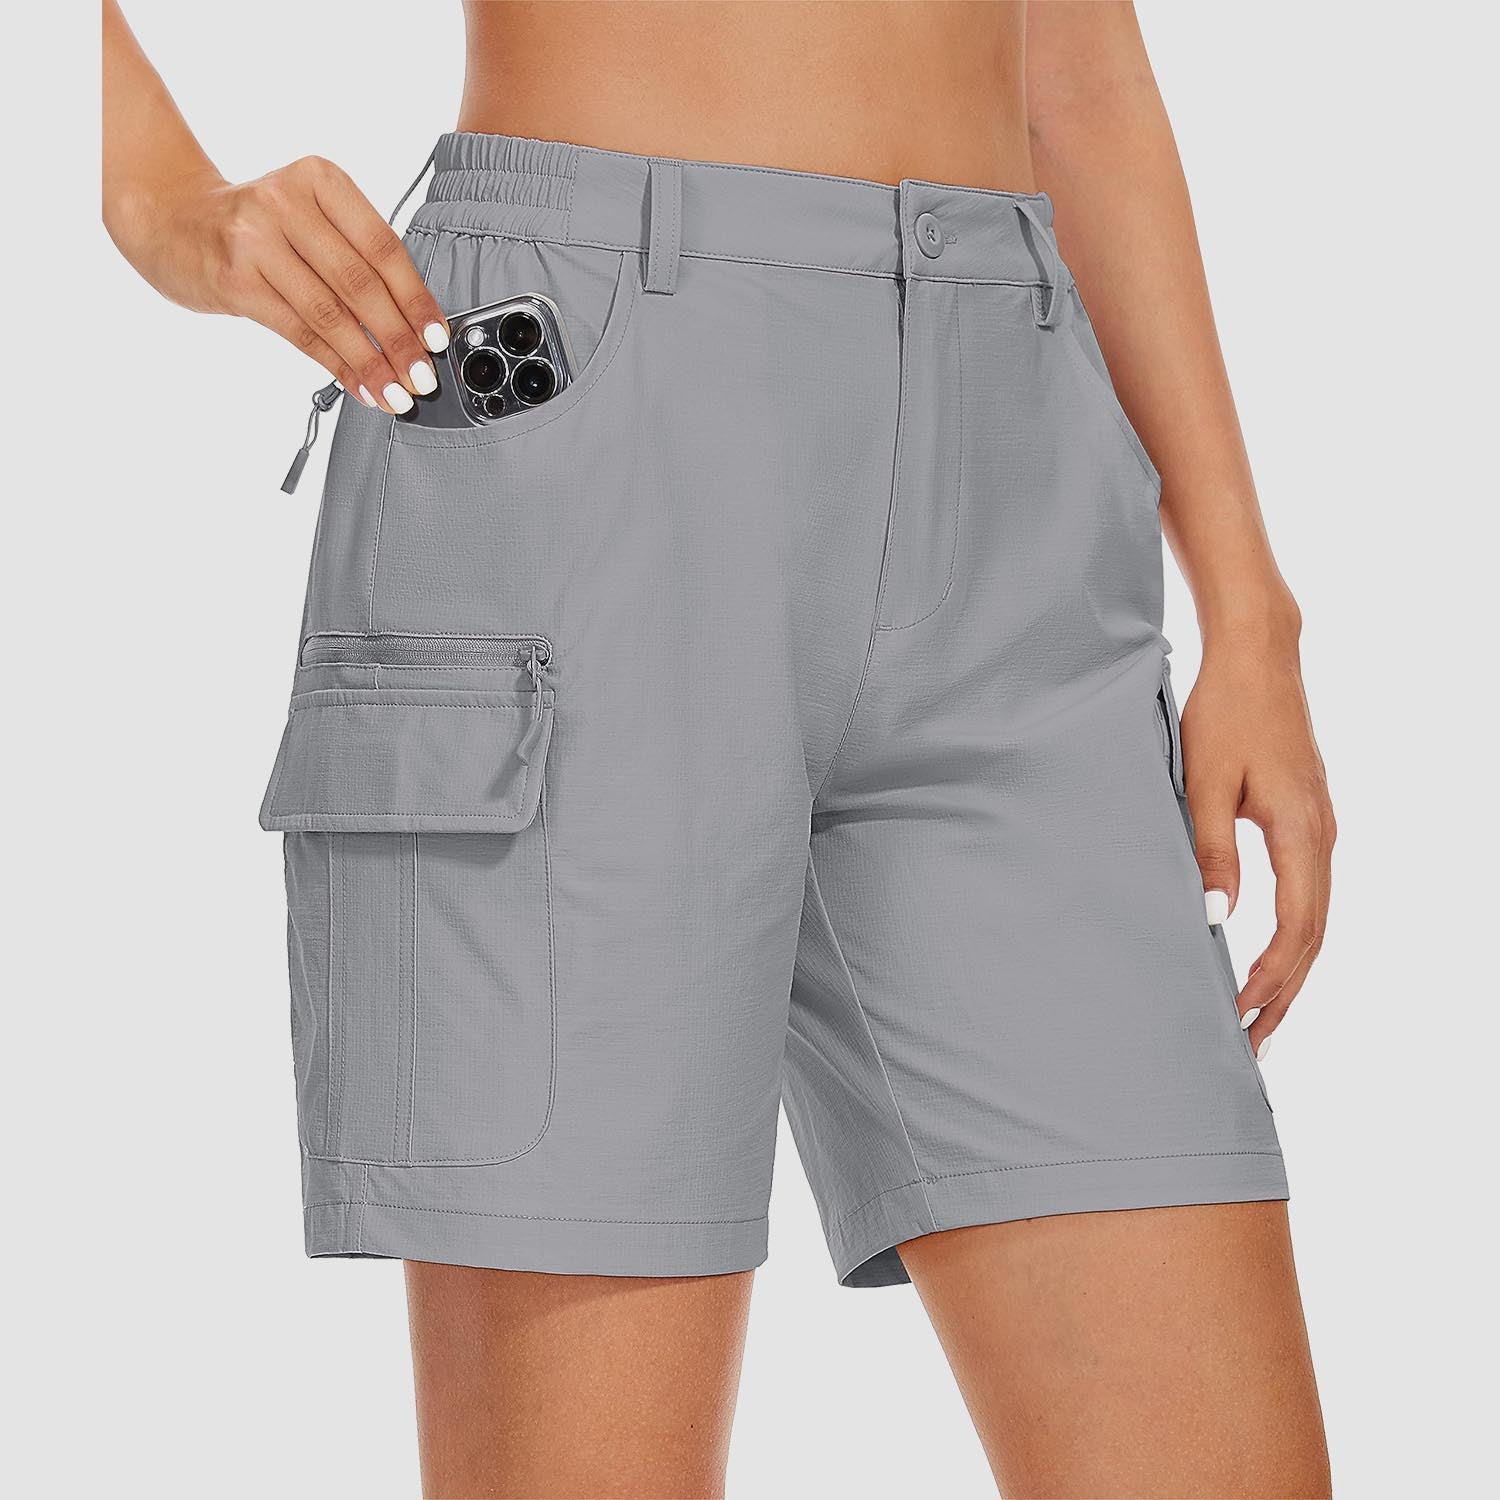 Women's   Golf Shorts 6 Pockets Quick Dry Hiking Cargo Shorts Lightweight Water Resistant Summer Outdoor Shorts